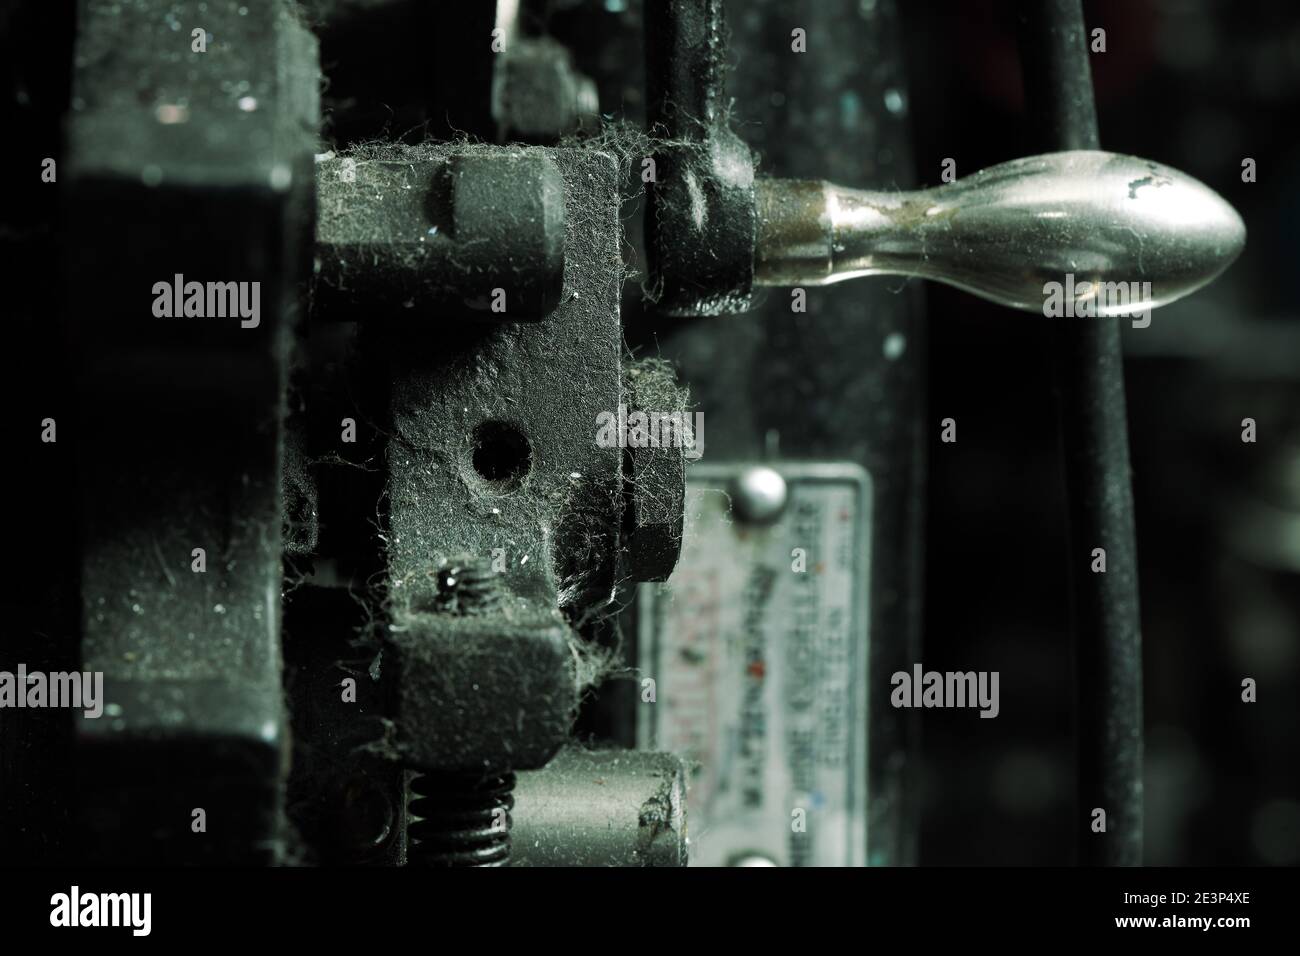 Part of an old mechanical machinery used in industrial process. Stock Photo